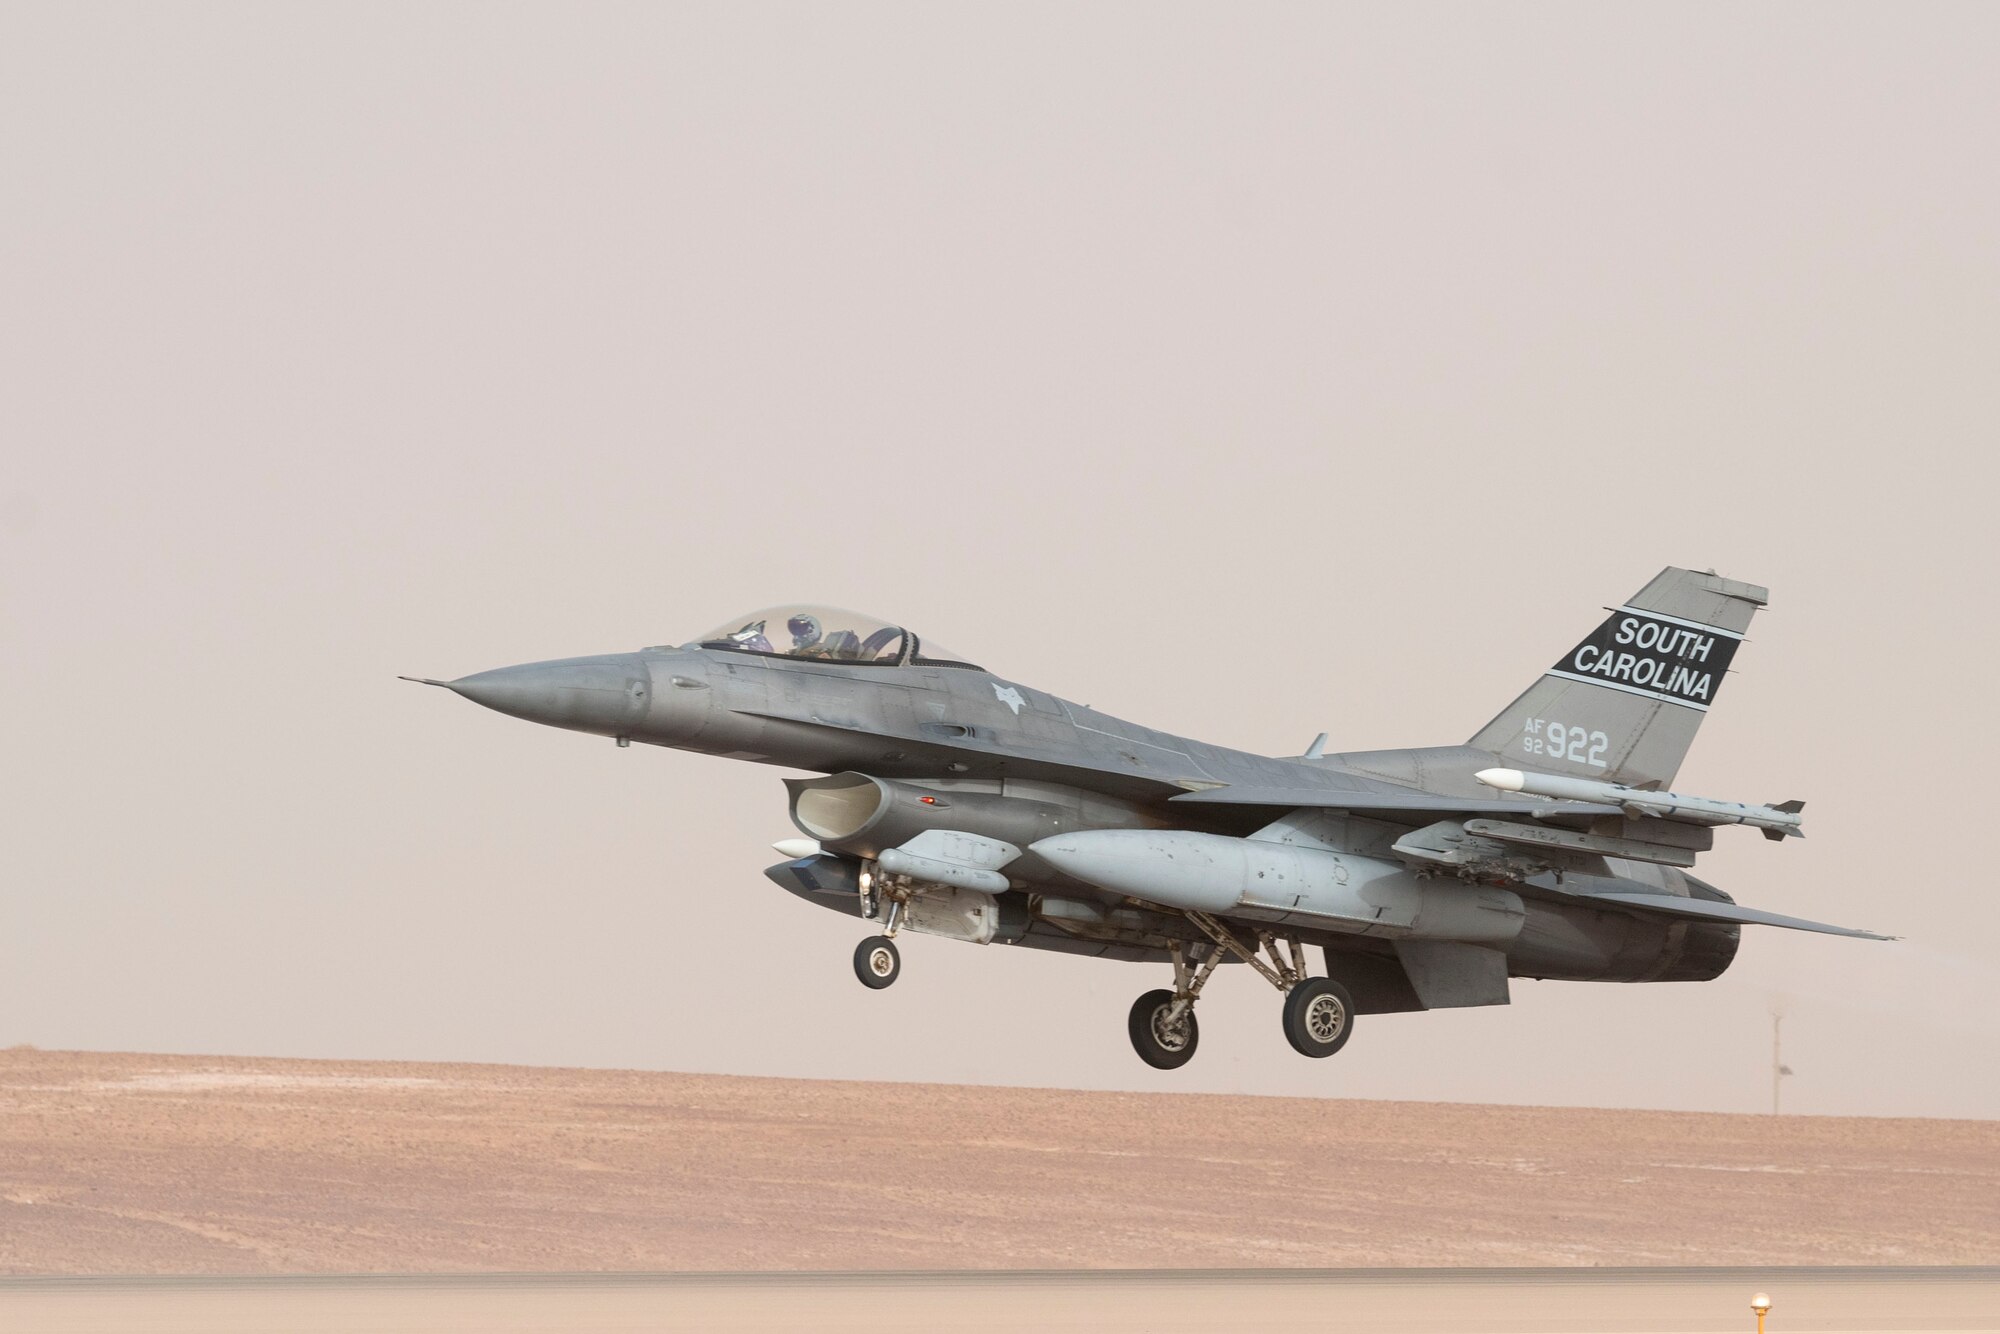 A U.S. Air Force F-16 Fighting Falcon takes off during a partner nation integration mission with the Royal Saudi Air Force at Prince Sultan Air base, June 17, 2021. U.S. Air Forces Central aircraft regularly work with coalition and partner nations to test their collective counter-UAS capabilities to ensure the security and stability of regional airspace. (U.S. Air Force photo by Staff Sgt. Caleb Pavao)